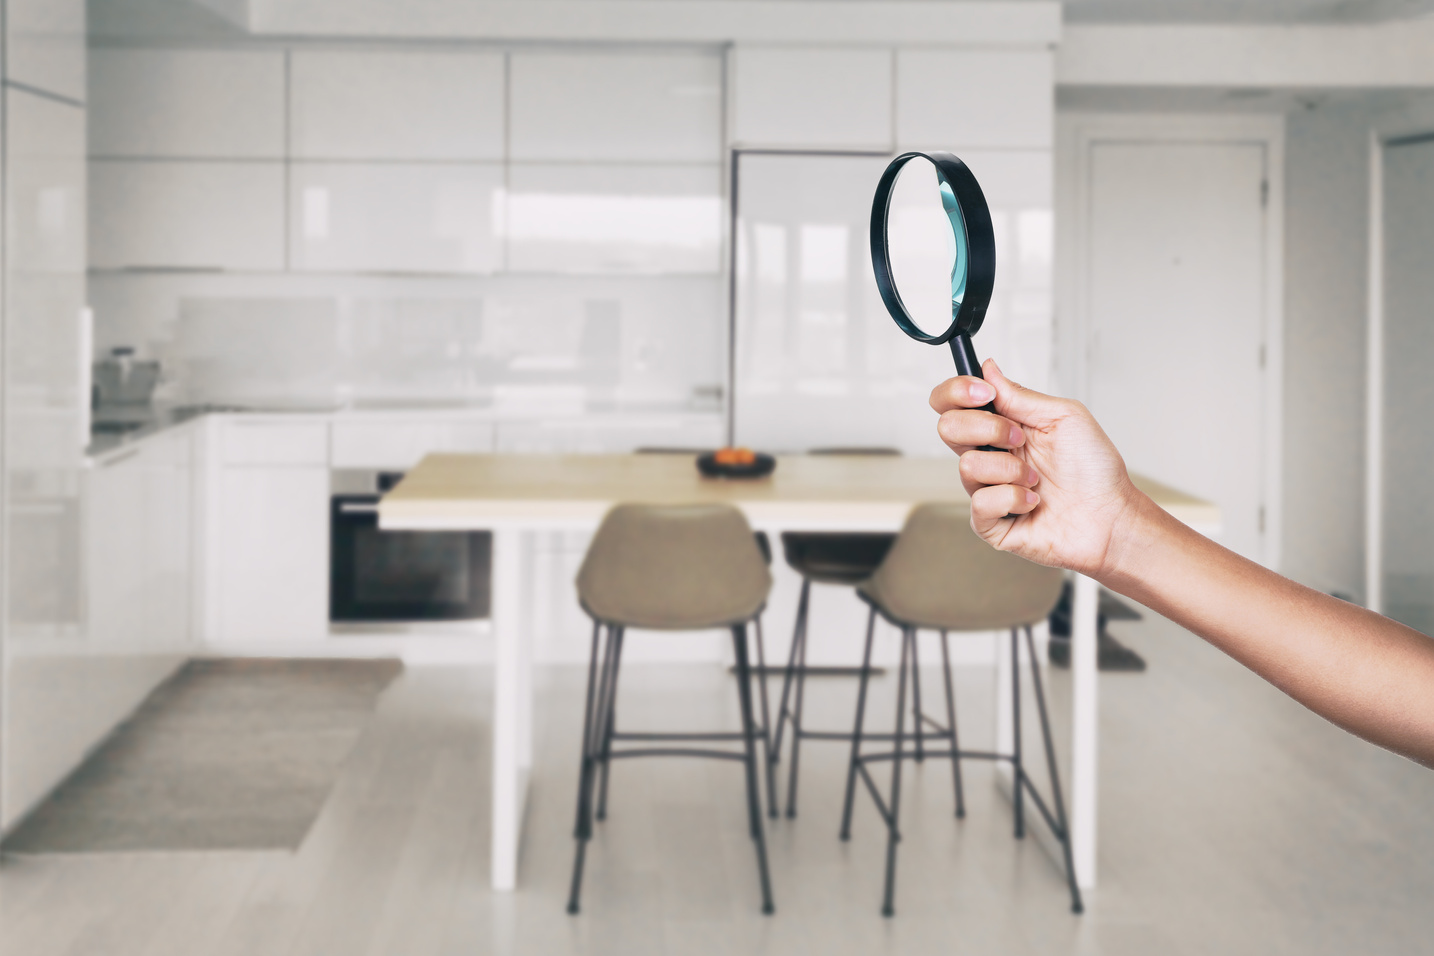 Home Inspection - Magnifying Glass Inspector Looking at Kitchen House Background